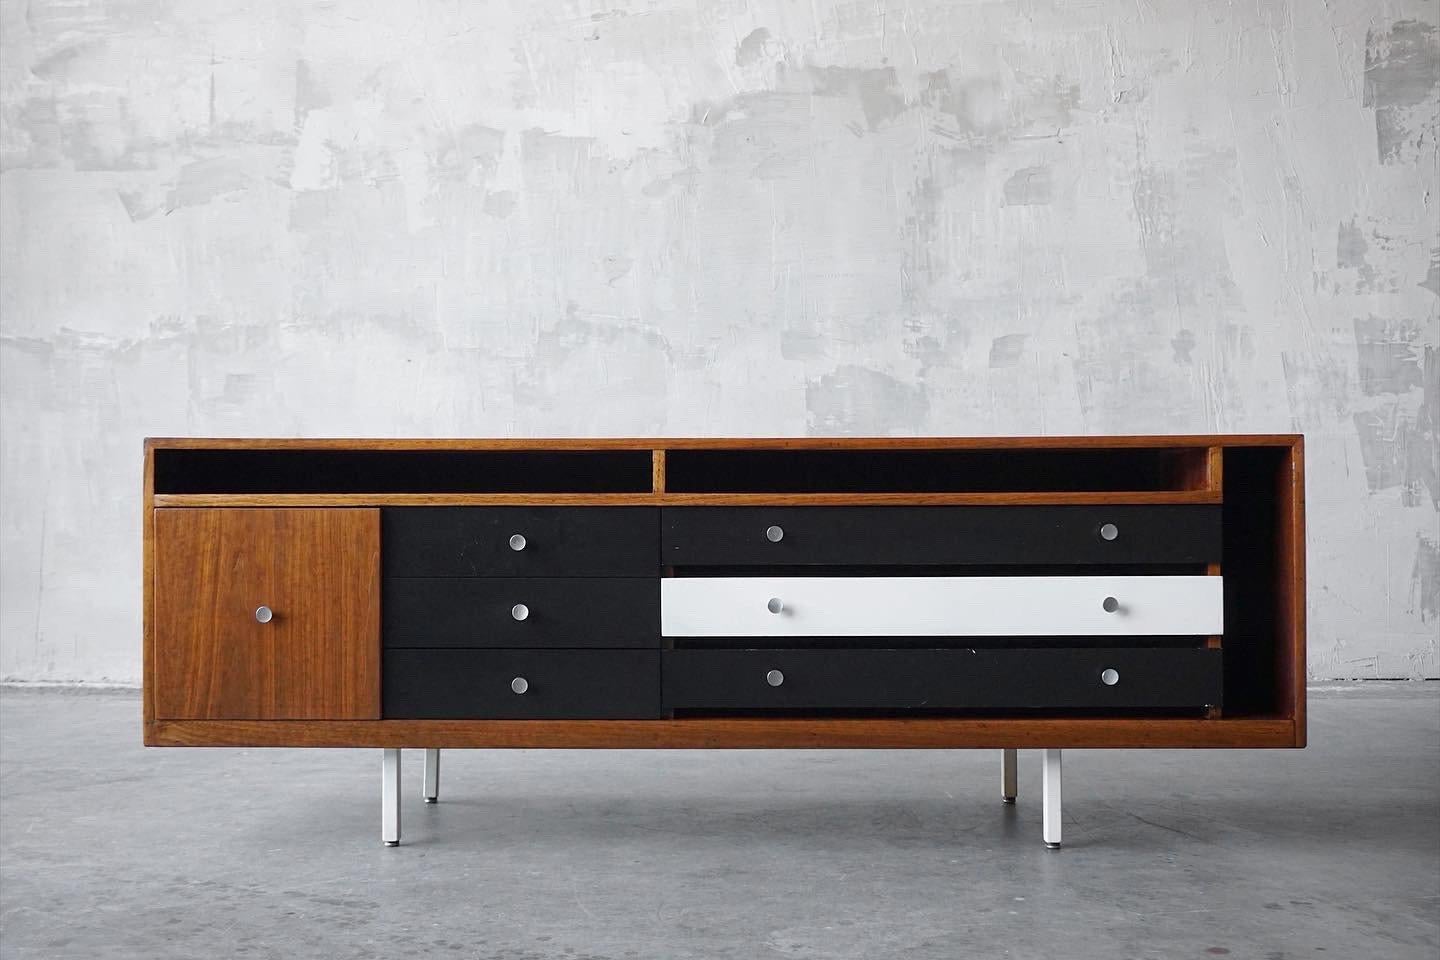 Rare credenza designed by Ladislav Rado for the collaboration between Knoll-Drake. Produced for one year only, circa 1955. 

Constructed with enameled steel legs, walnut body and enameled plastic. 

Excellent original condition with just light